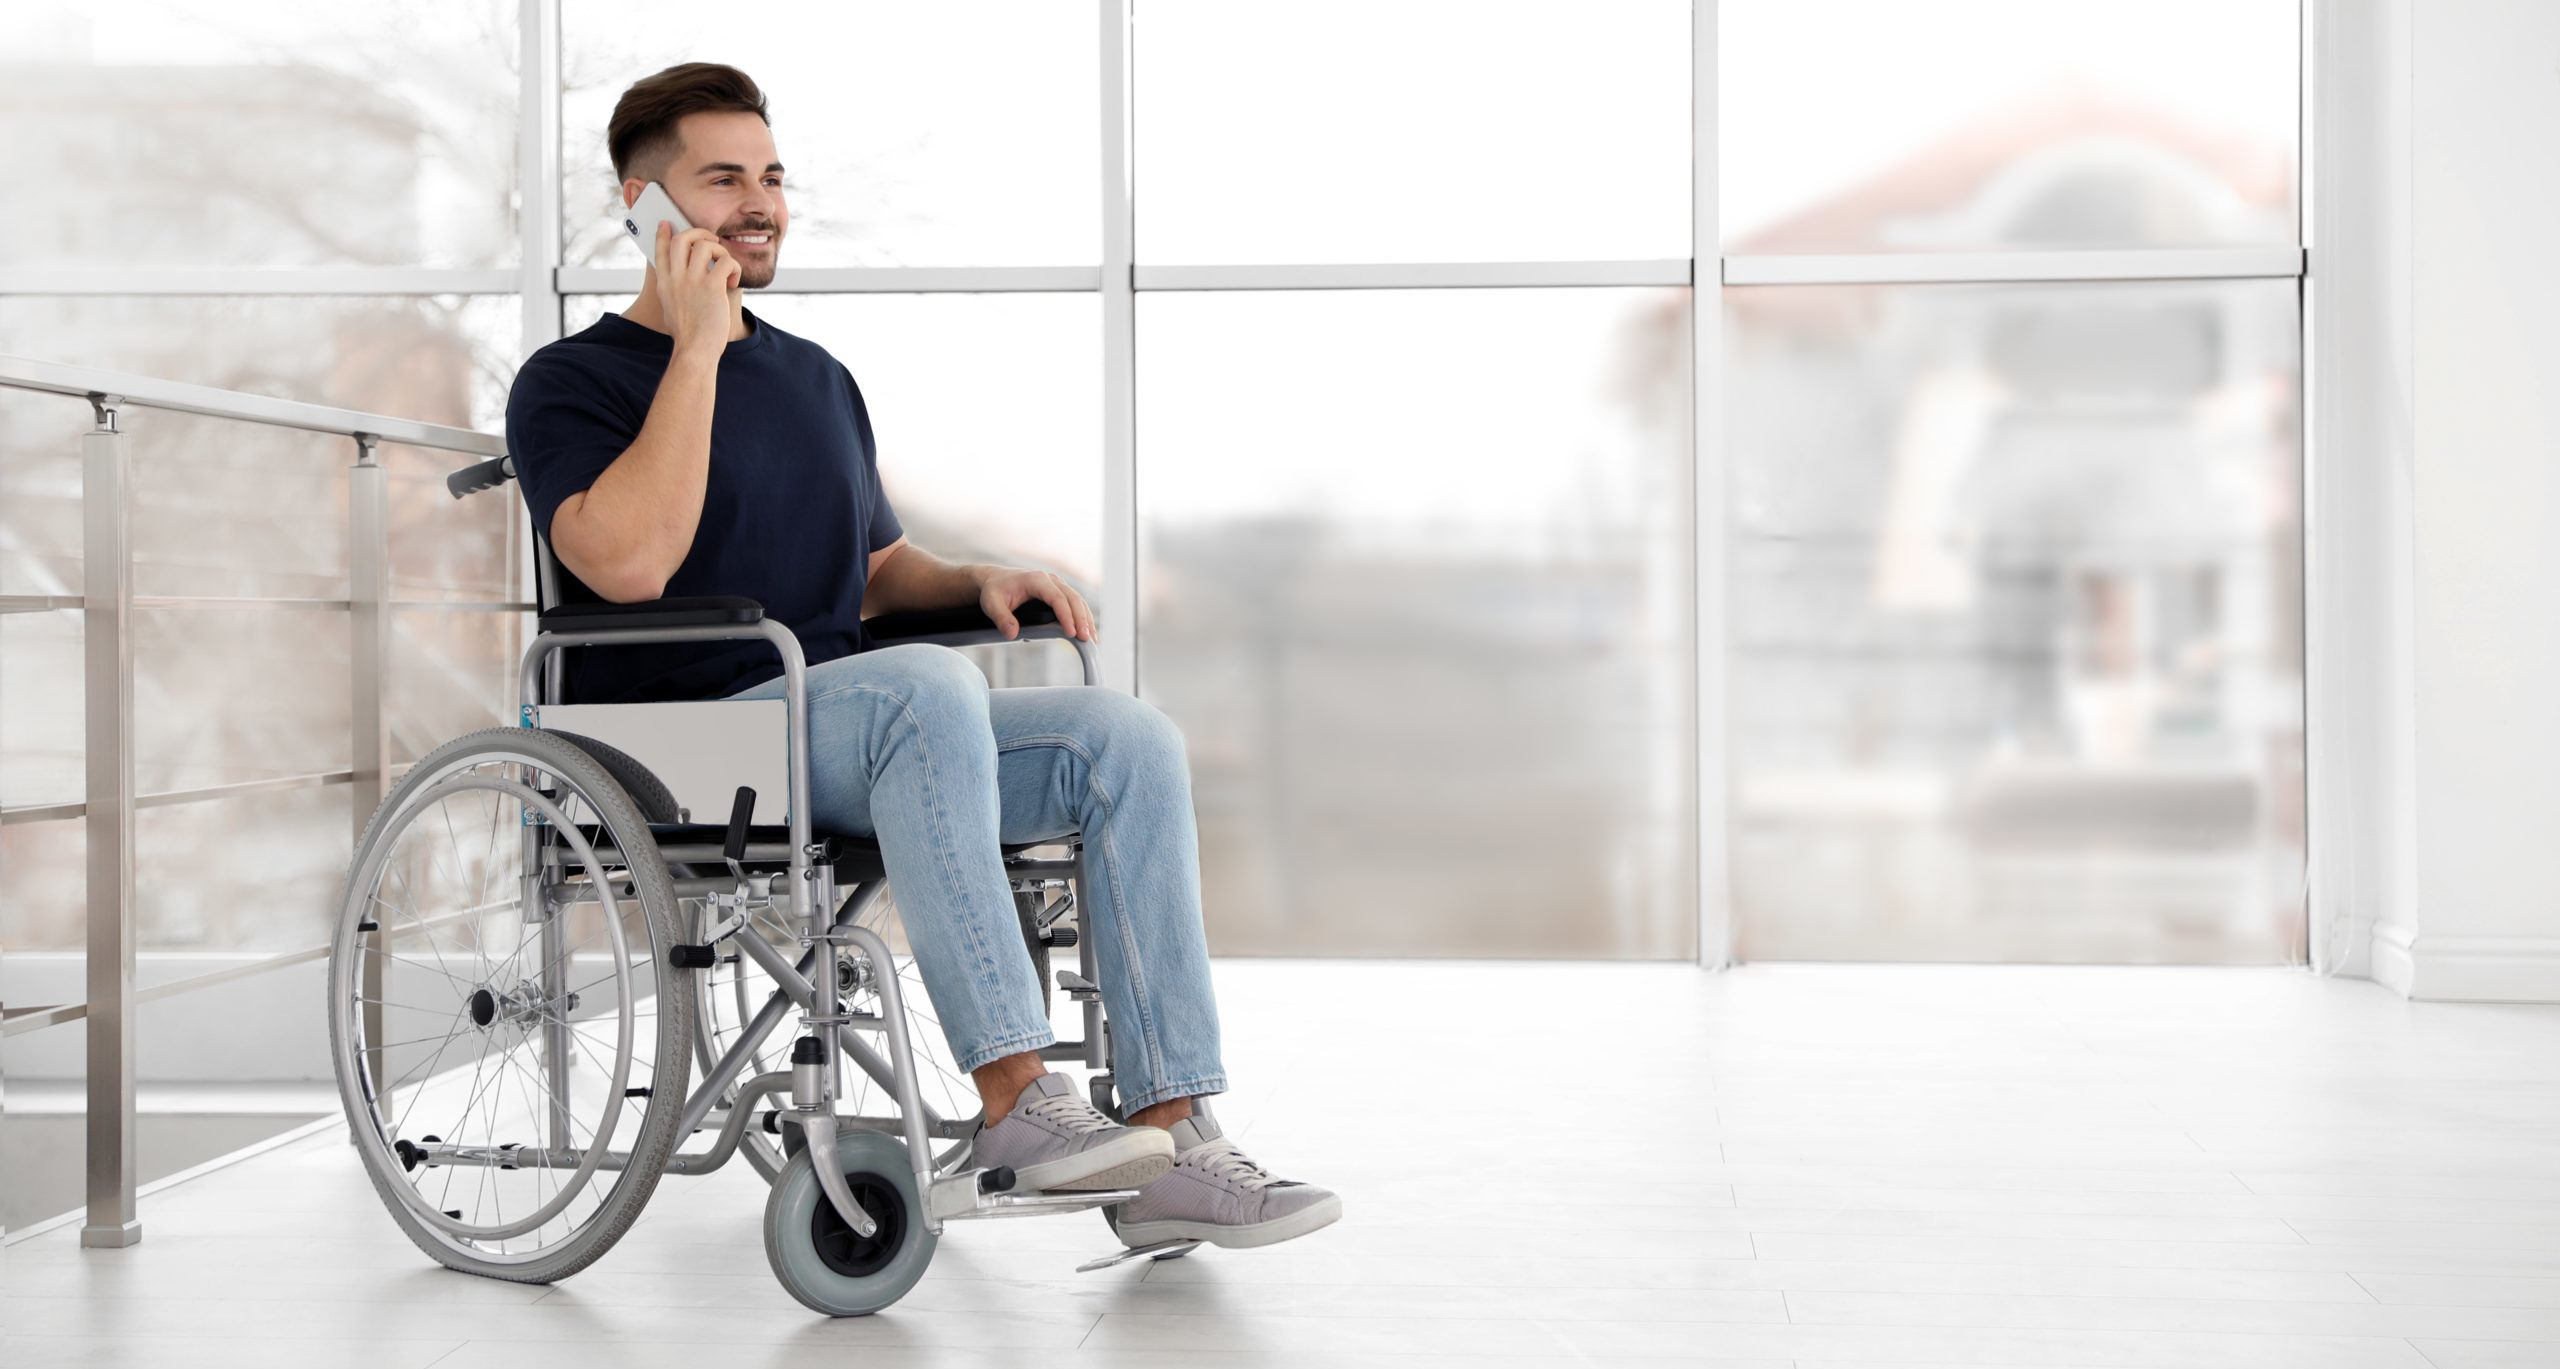 Young man in wheelchair talking on mobile phone near window indoors